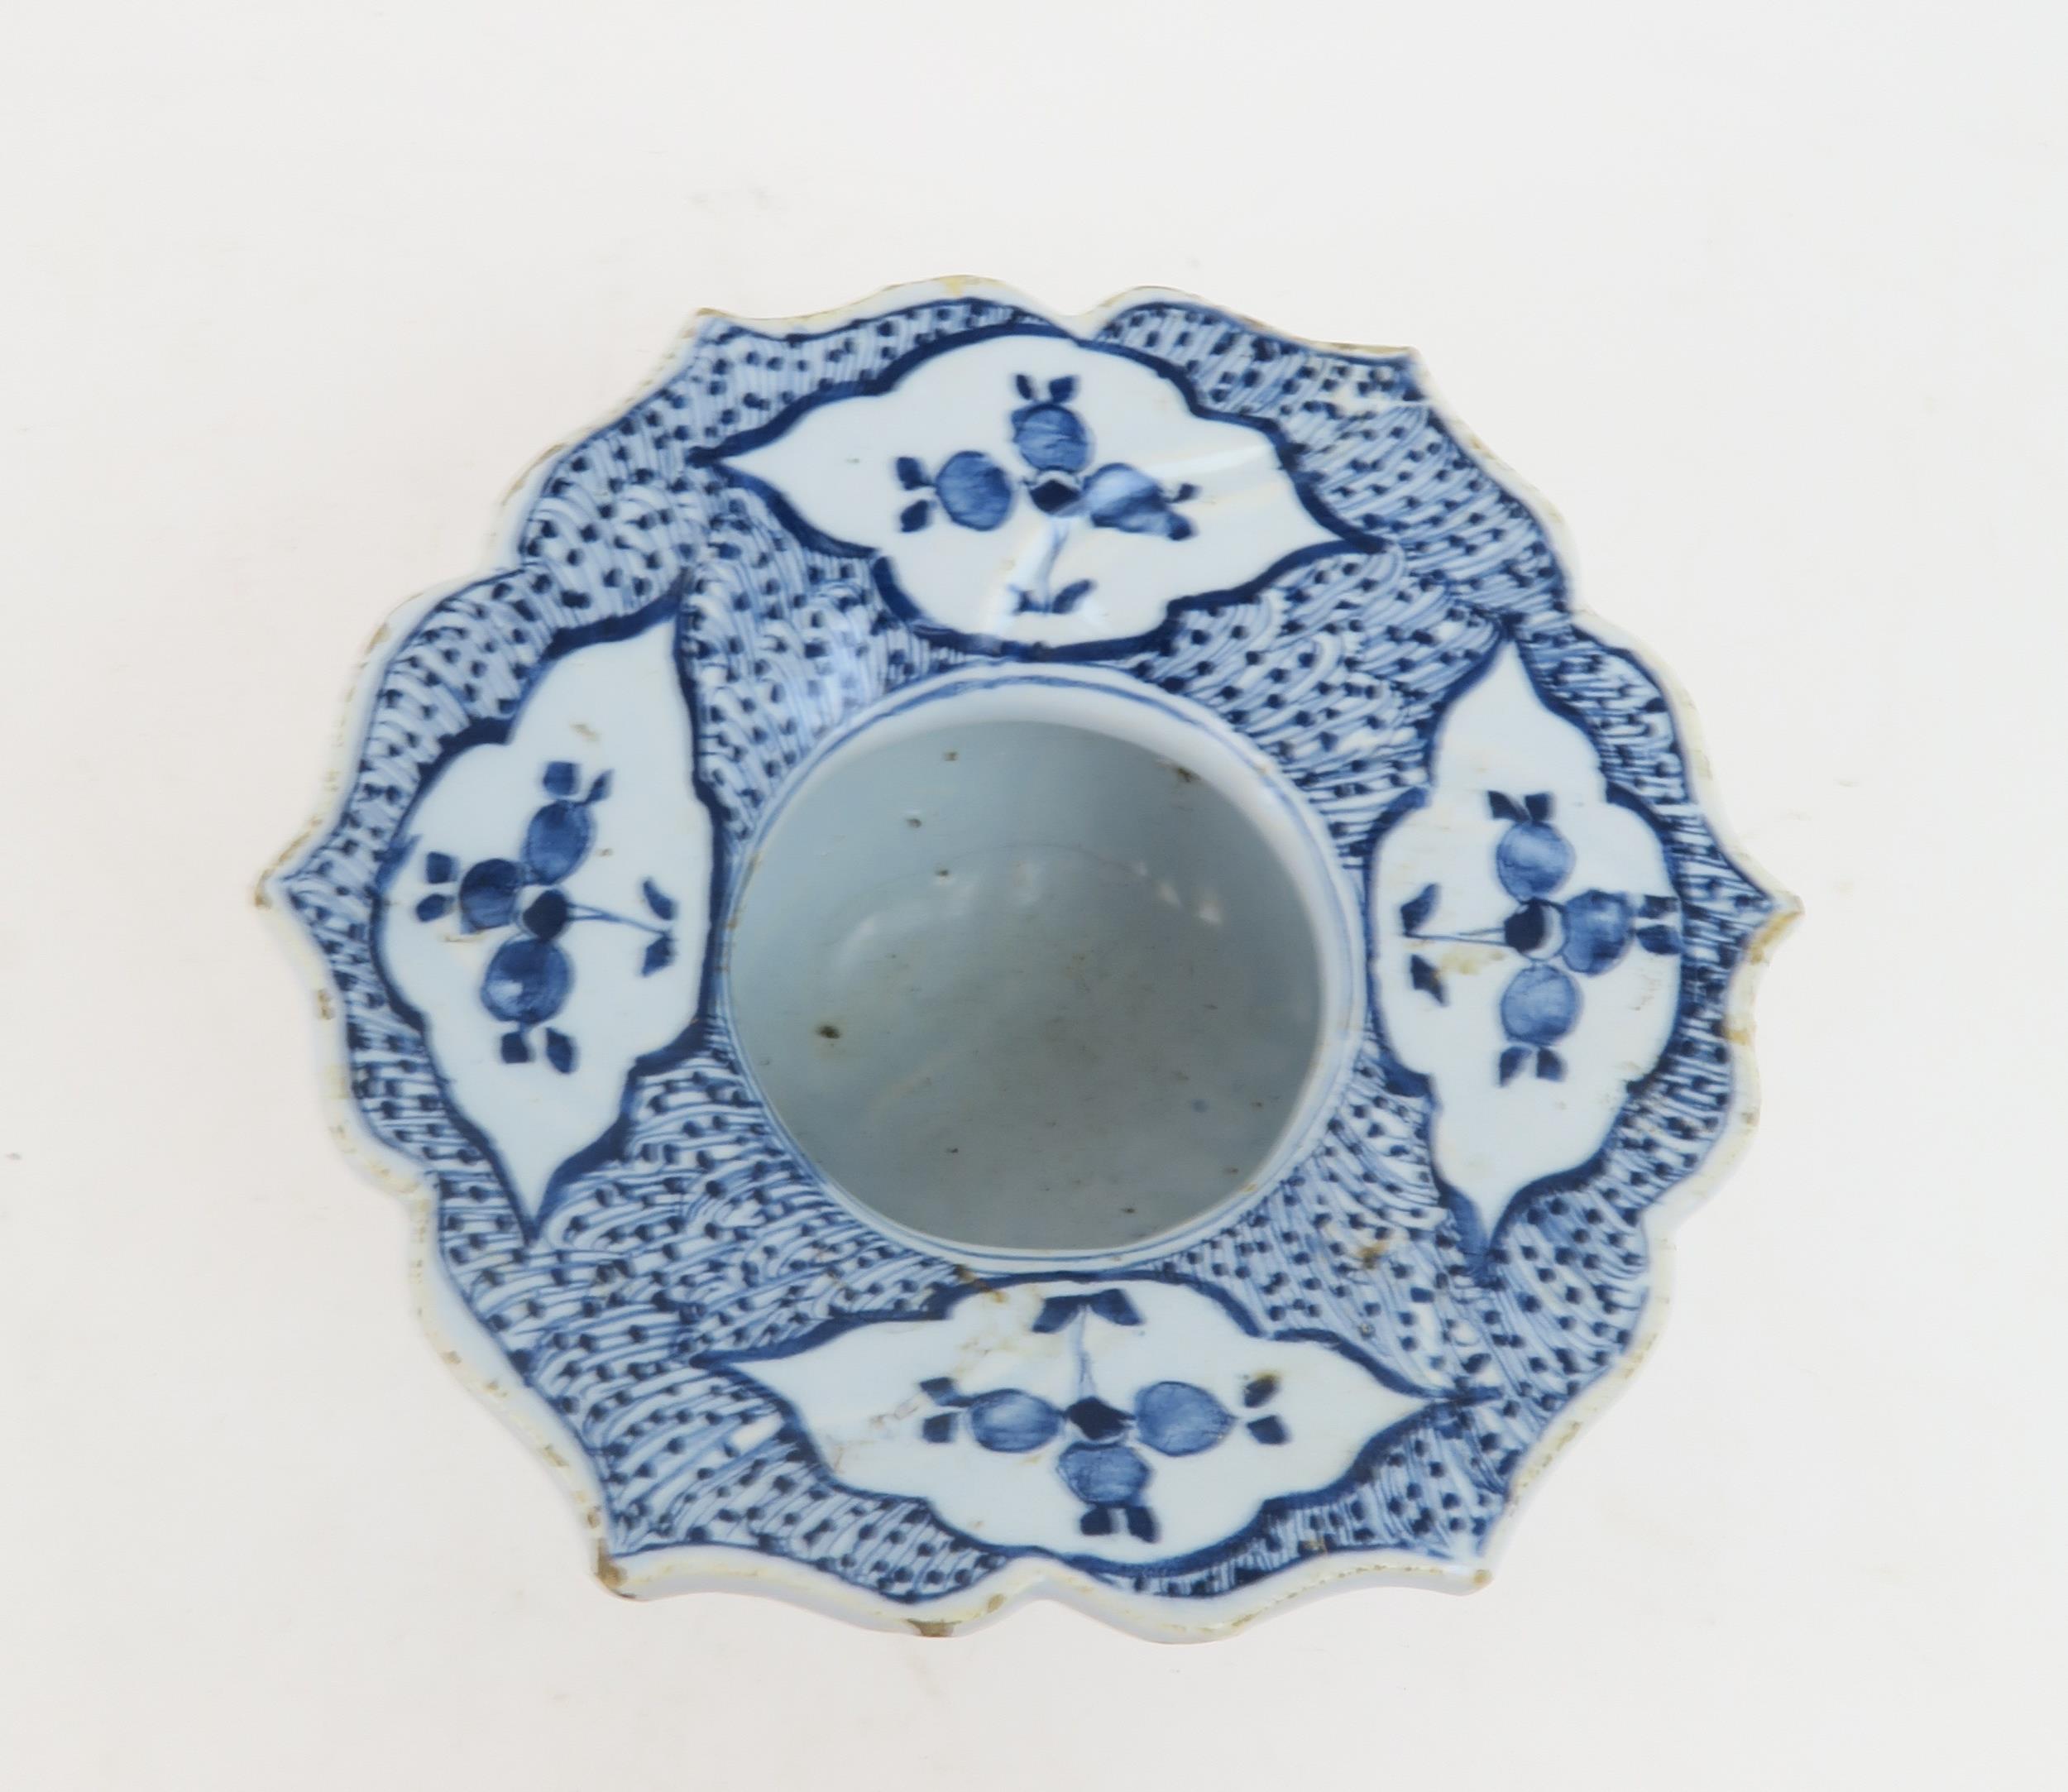 AN 18TH CENTURY DUTCH DELFT SPITTOON with flared scalloped edge, painted with sprigs of flowers, - Image 4 of 6